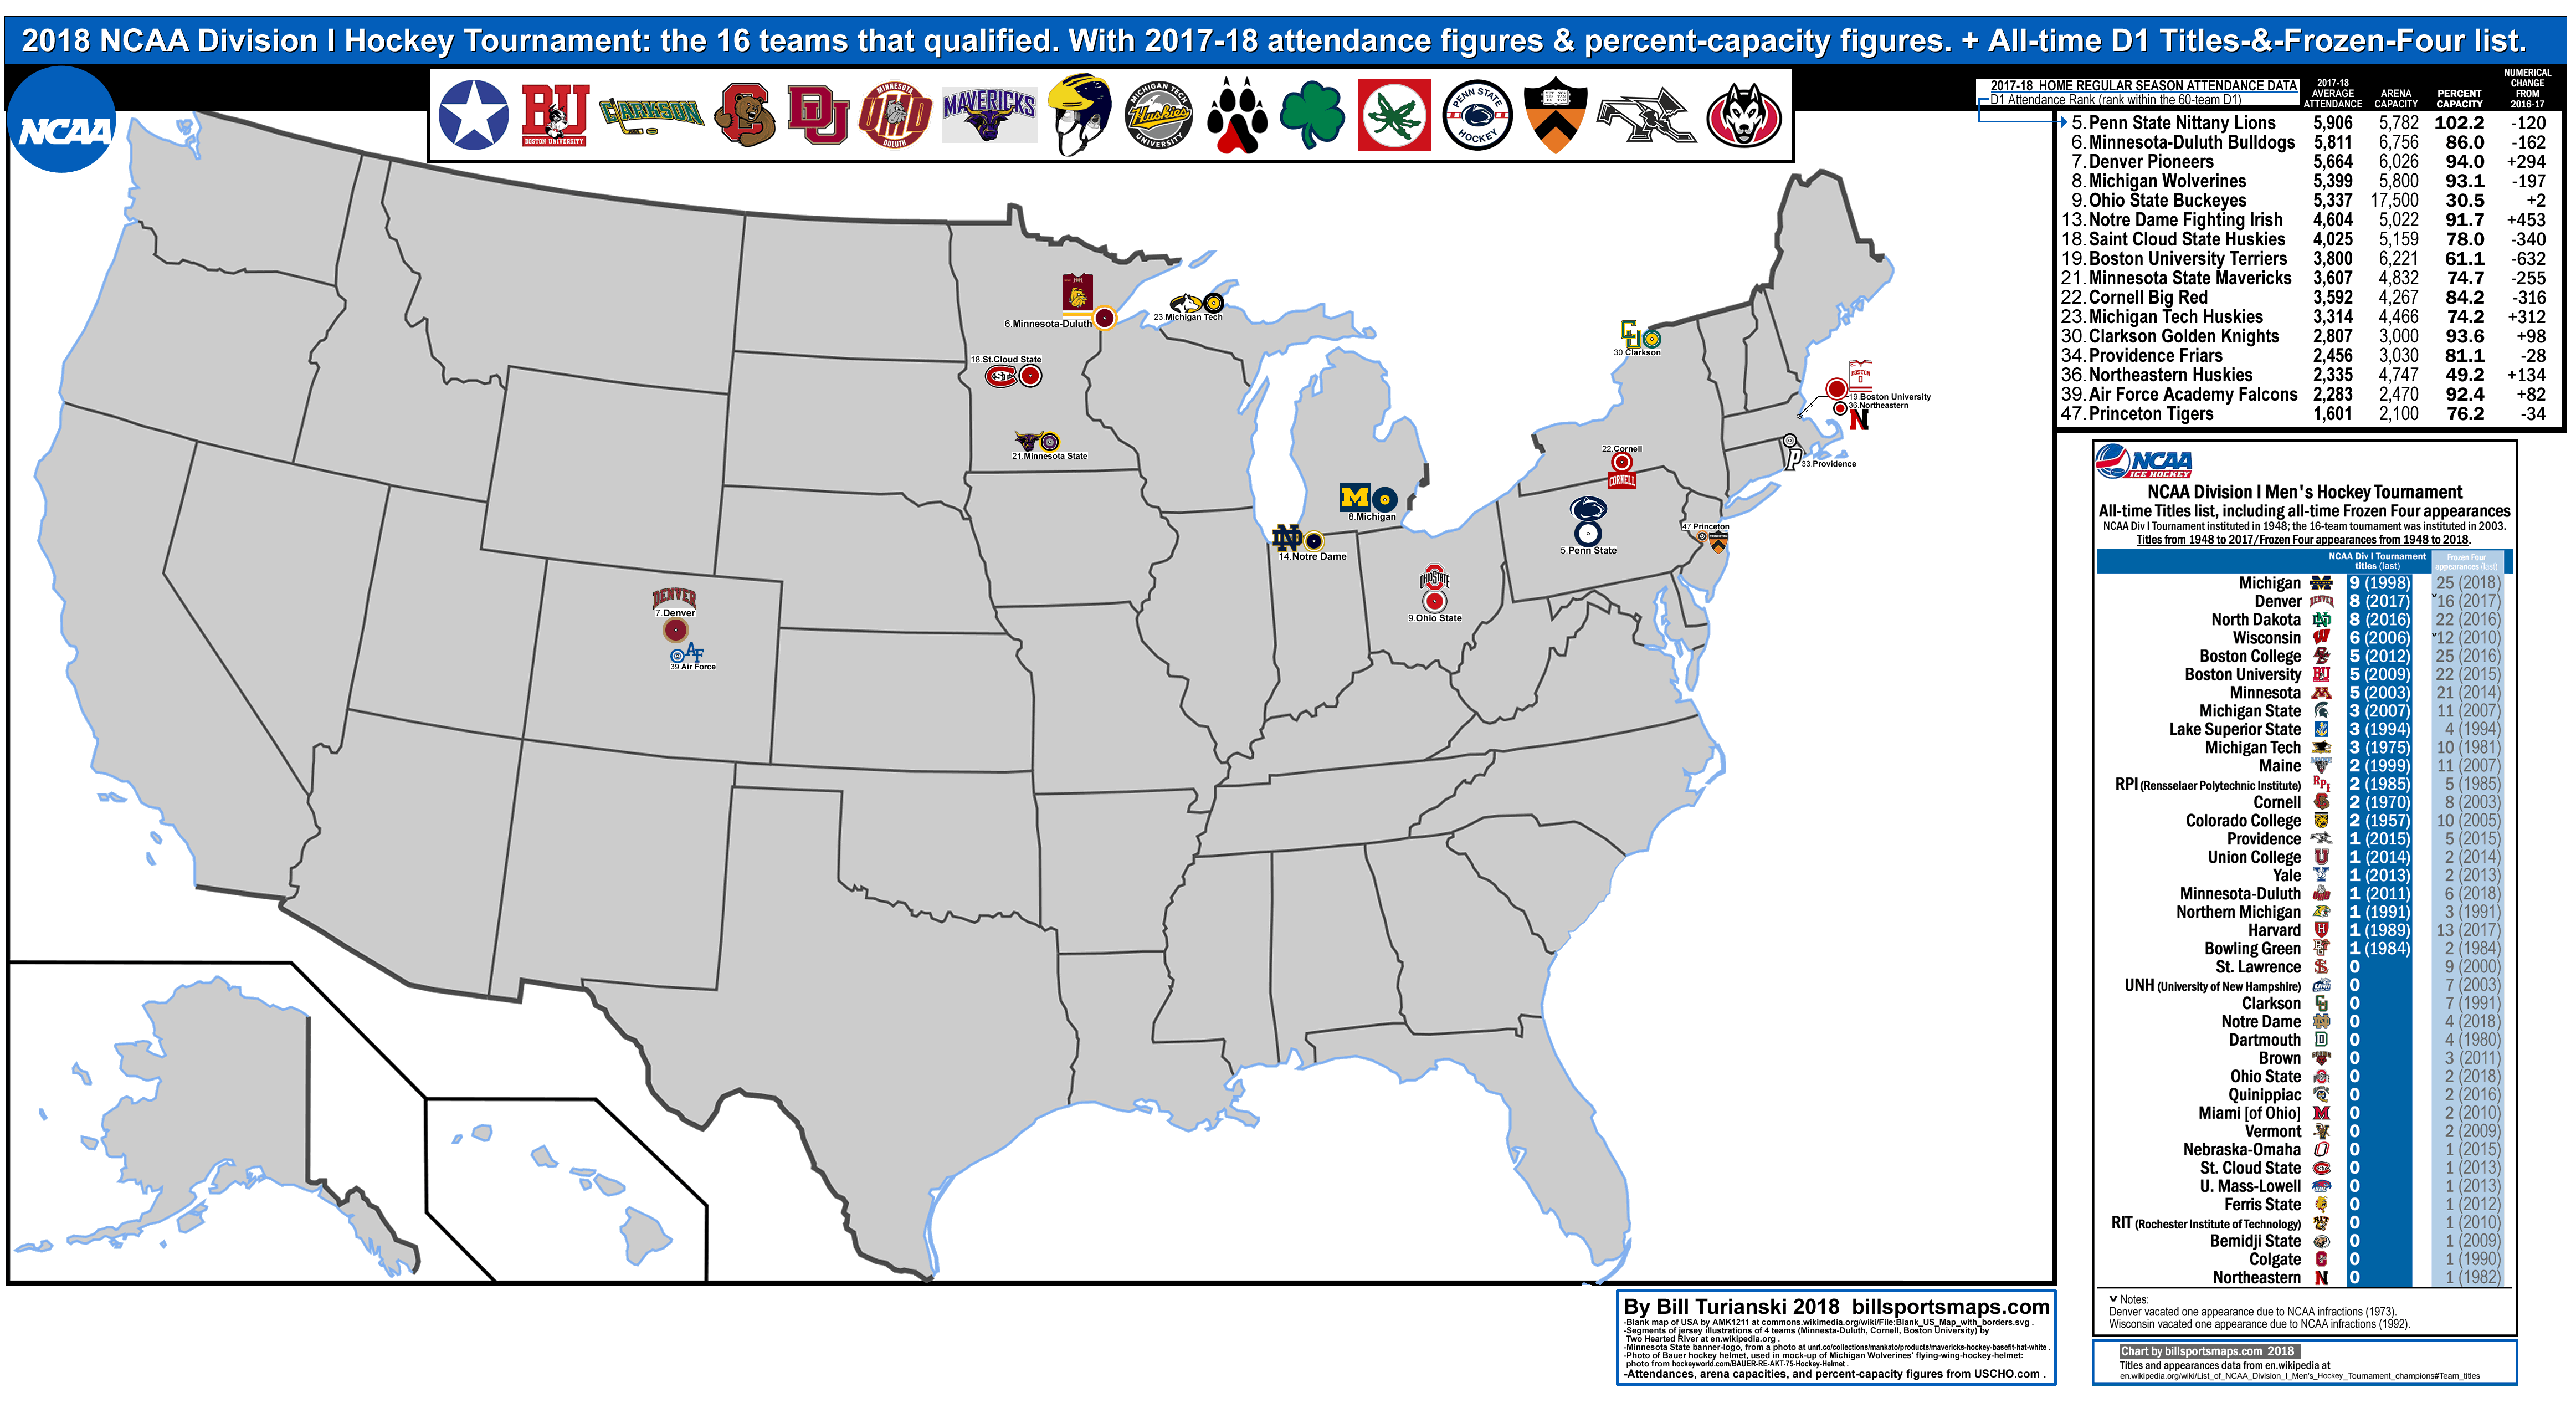 File:NHL teams and conferences map - 2017-18.svg - Wikimedia Commons